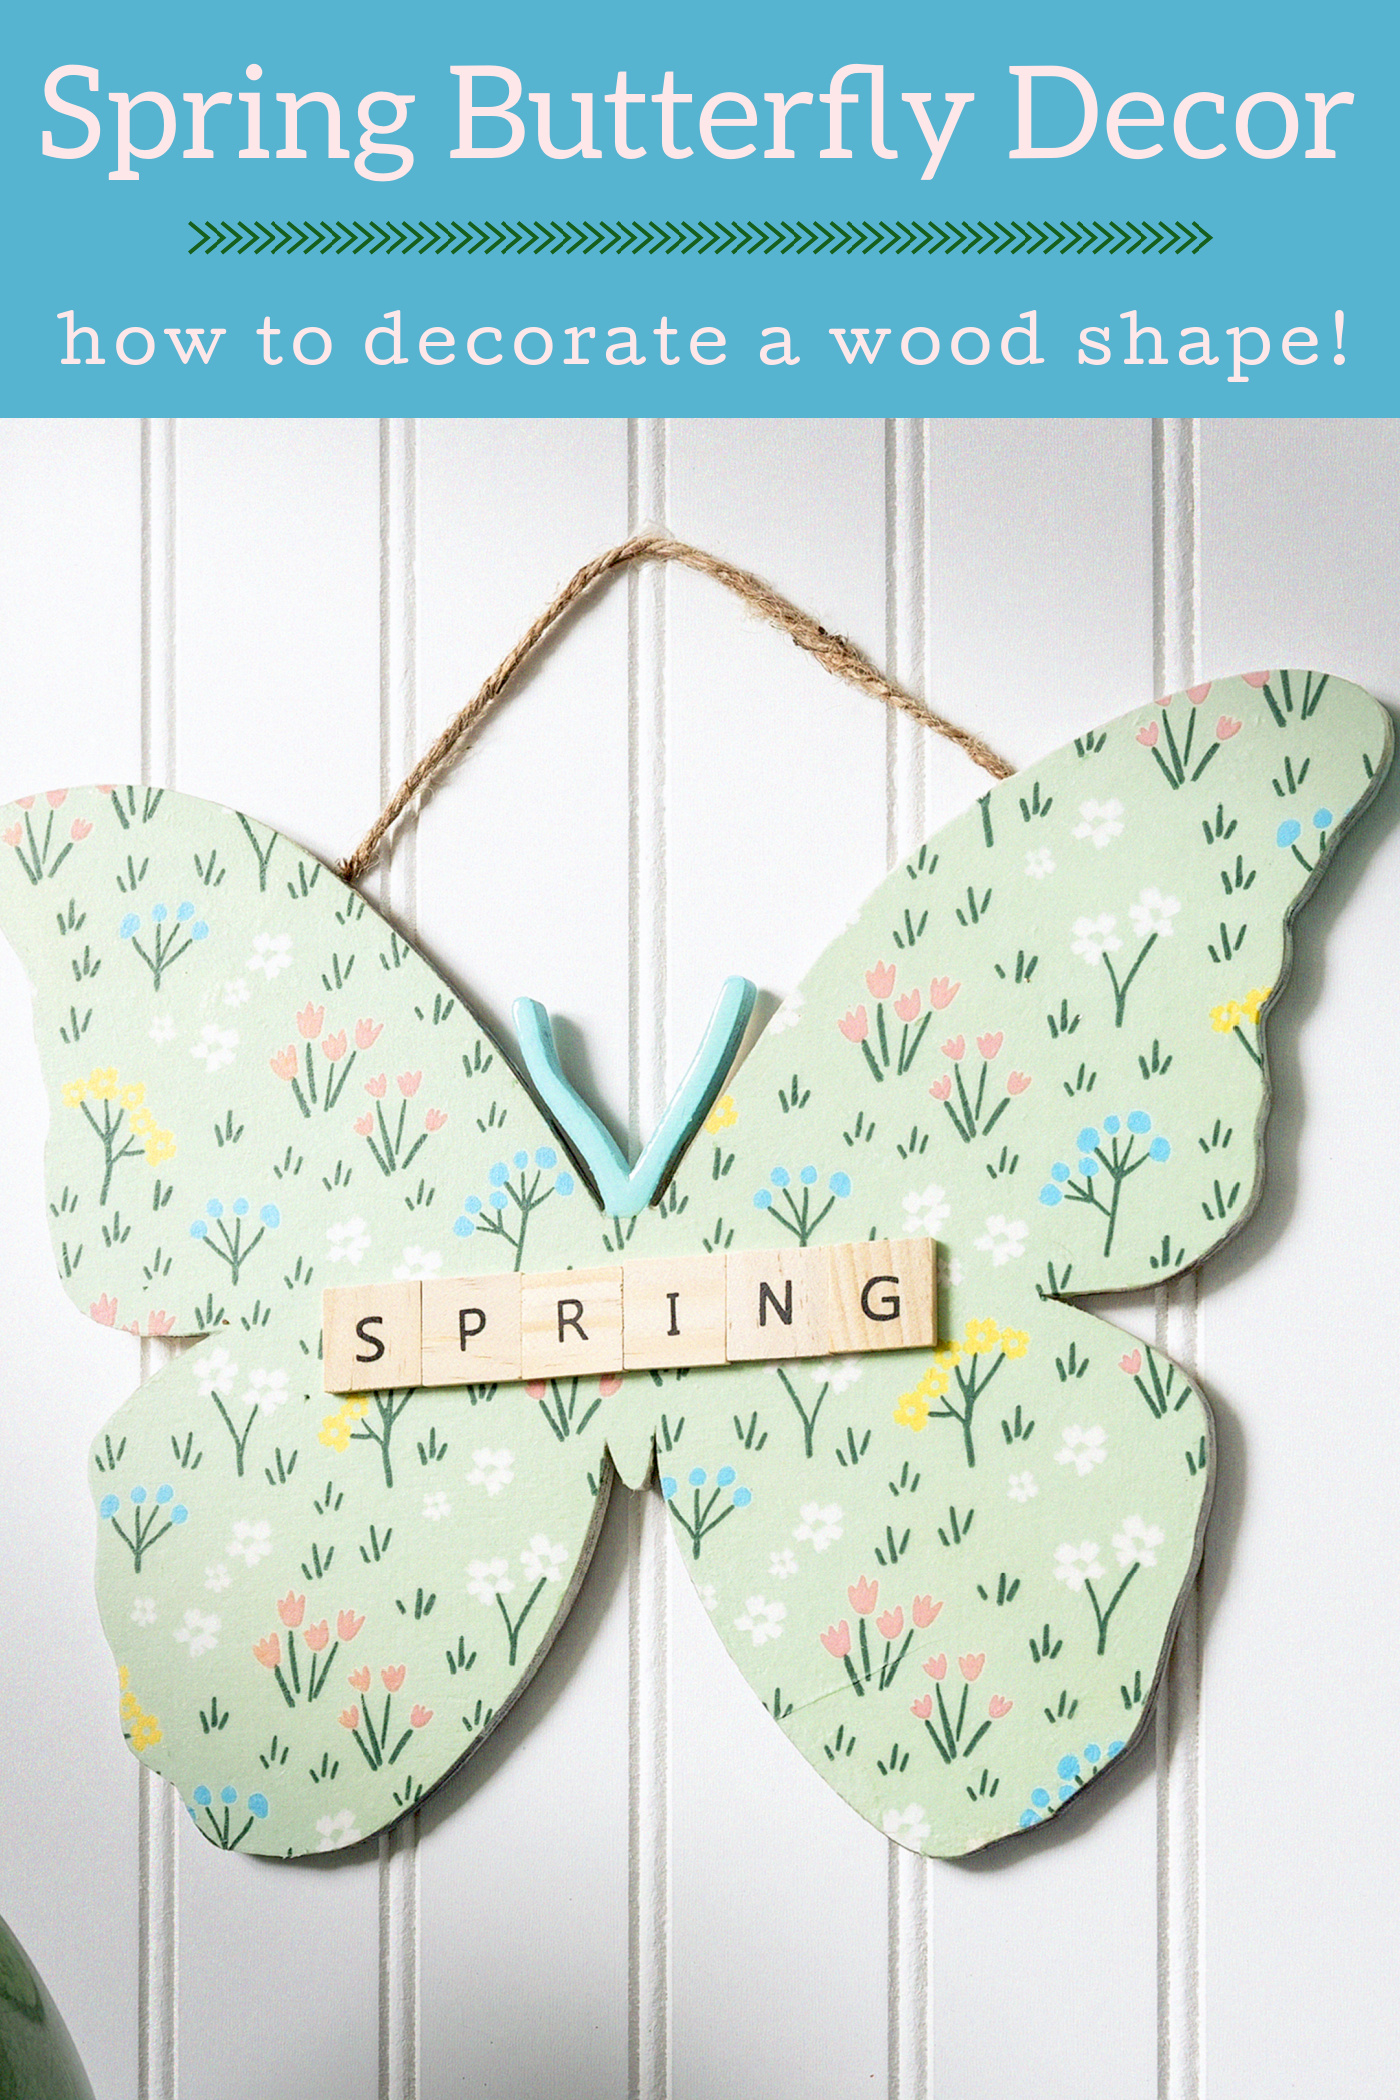 Spring Butterfly Decor